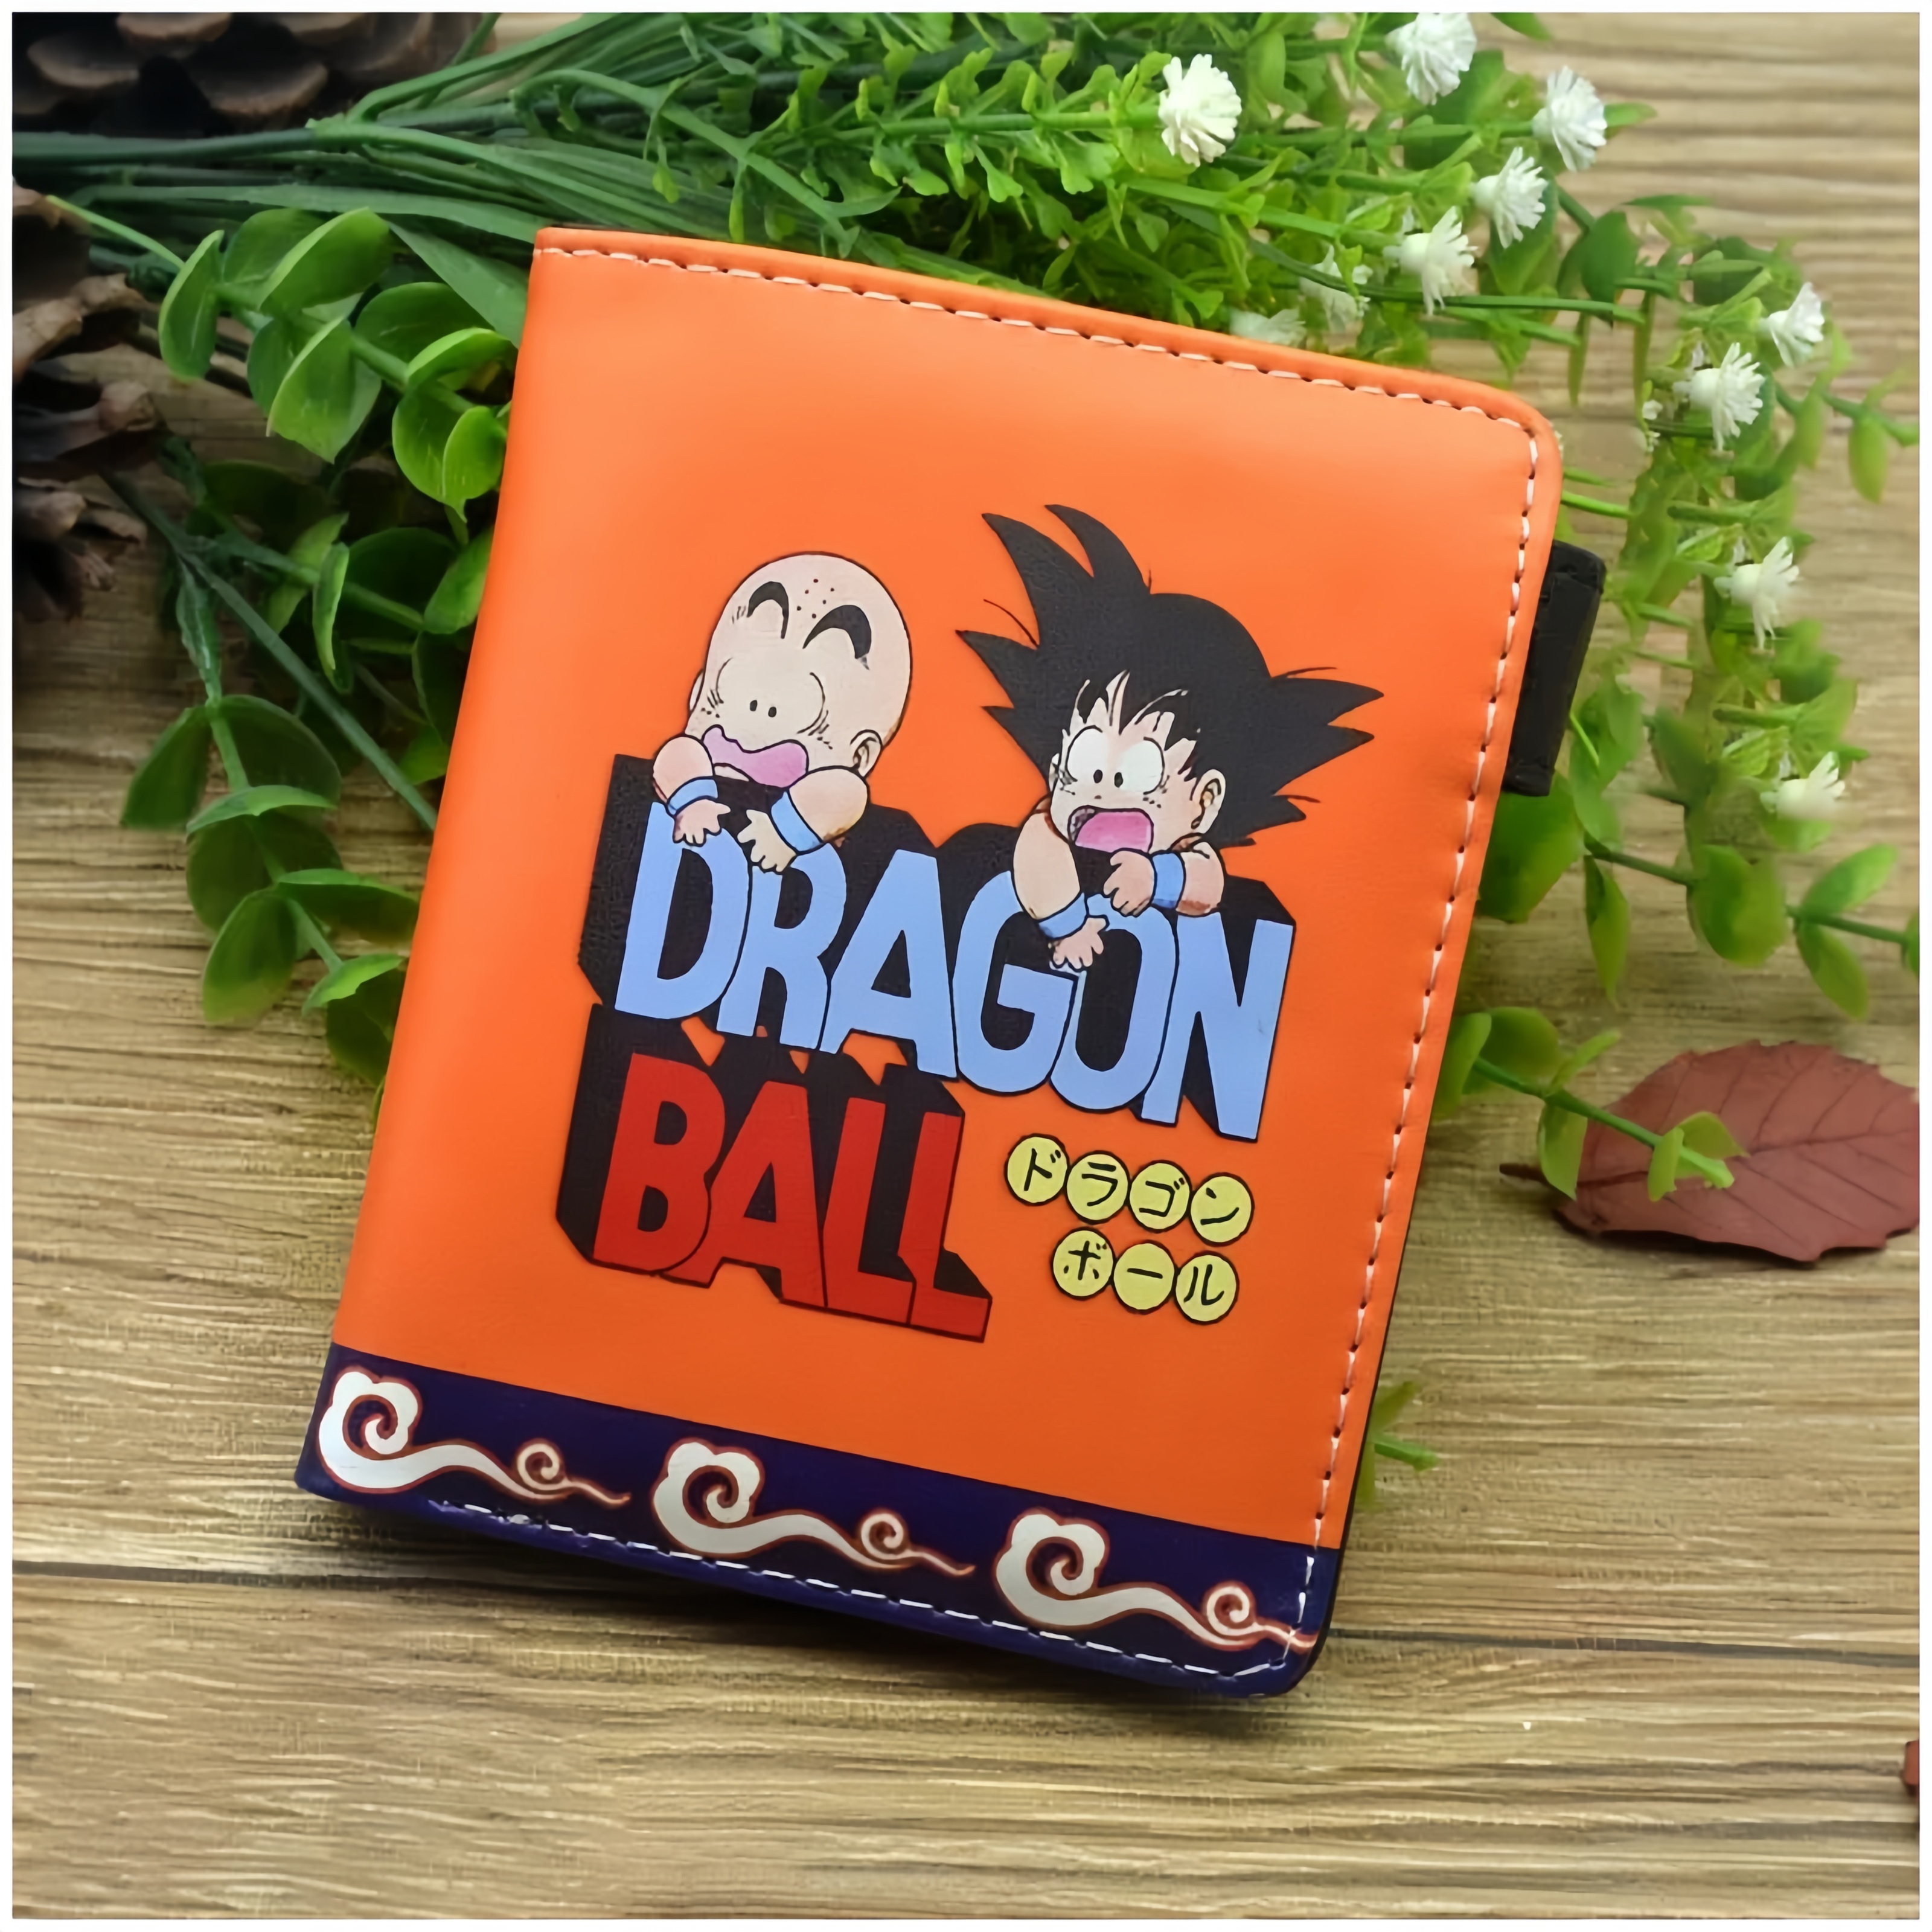 

Cartoon Wallet, Synthetic Leather, Polyester, Casual Style, Color Block, Goku Design, Bandai Licensed Short Money Holder For Men And Women